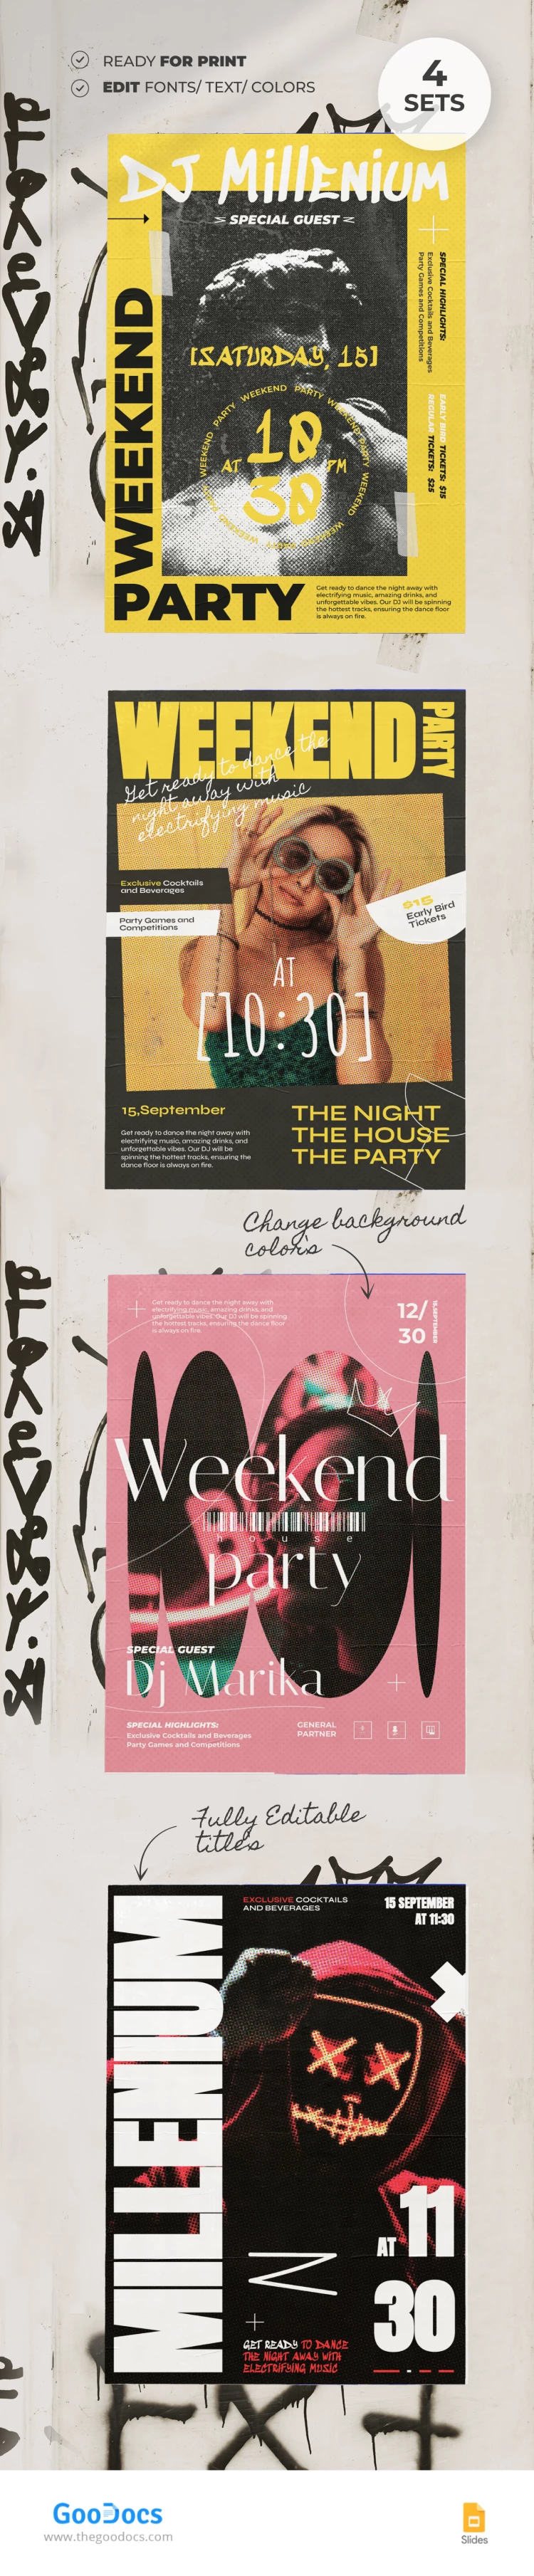 Weekend Party Flyer - free Google Docs Template - 10068719